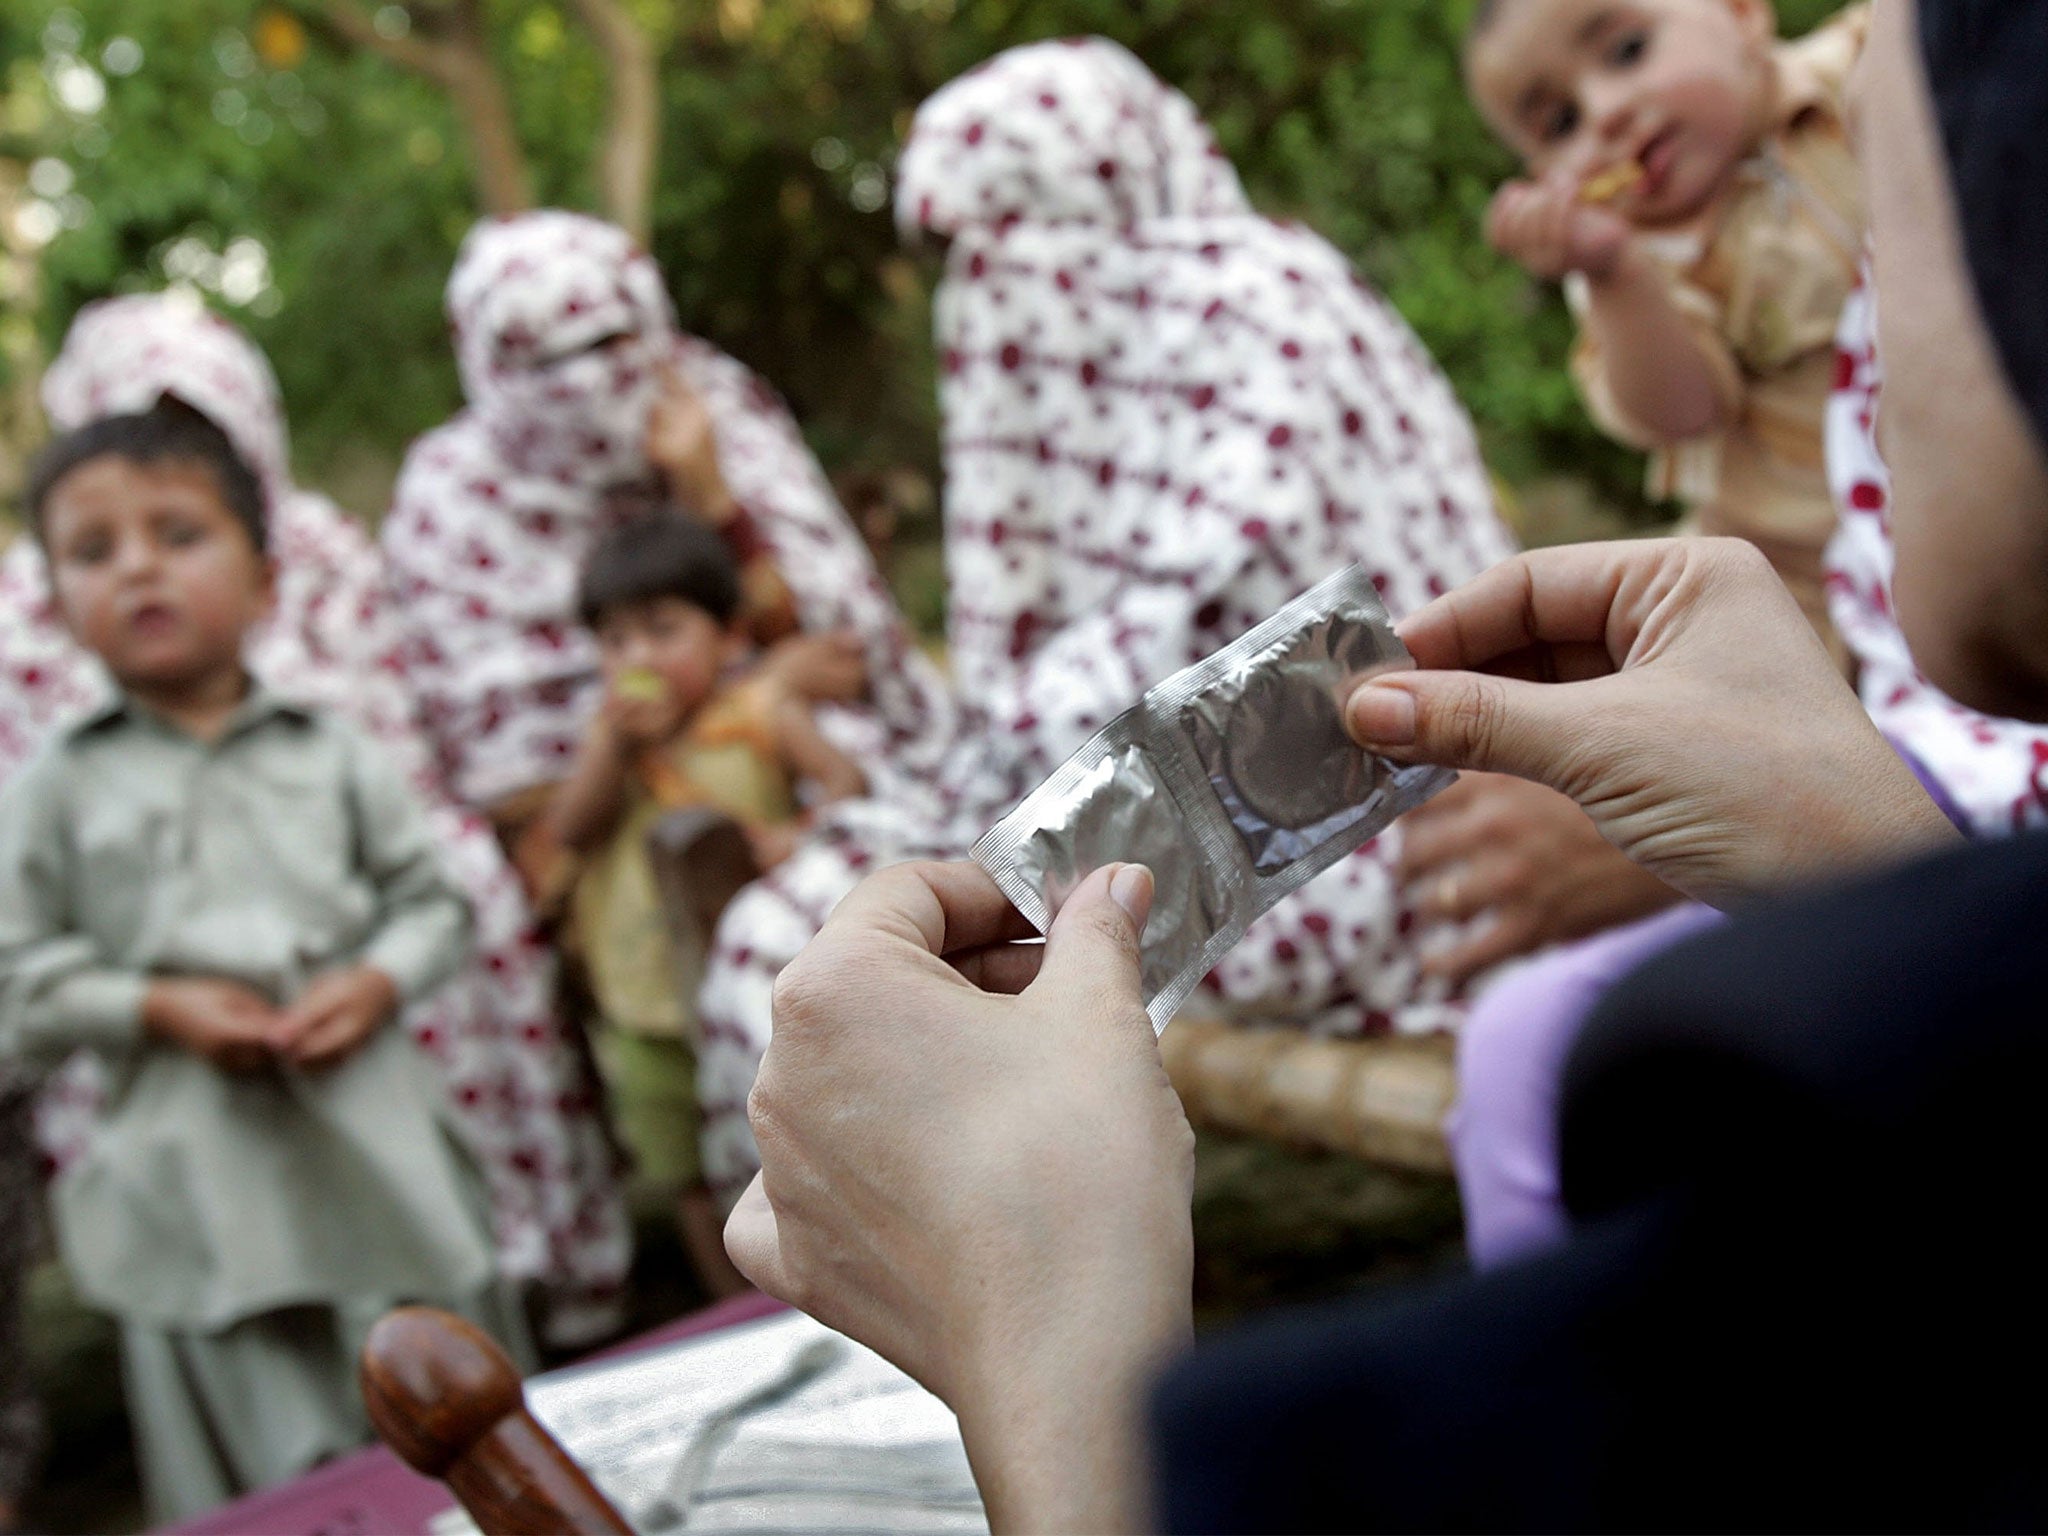 Condoms are shown to a group of women during a safe sex education class in Pakistan